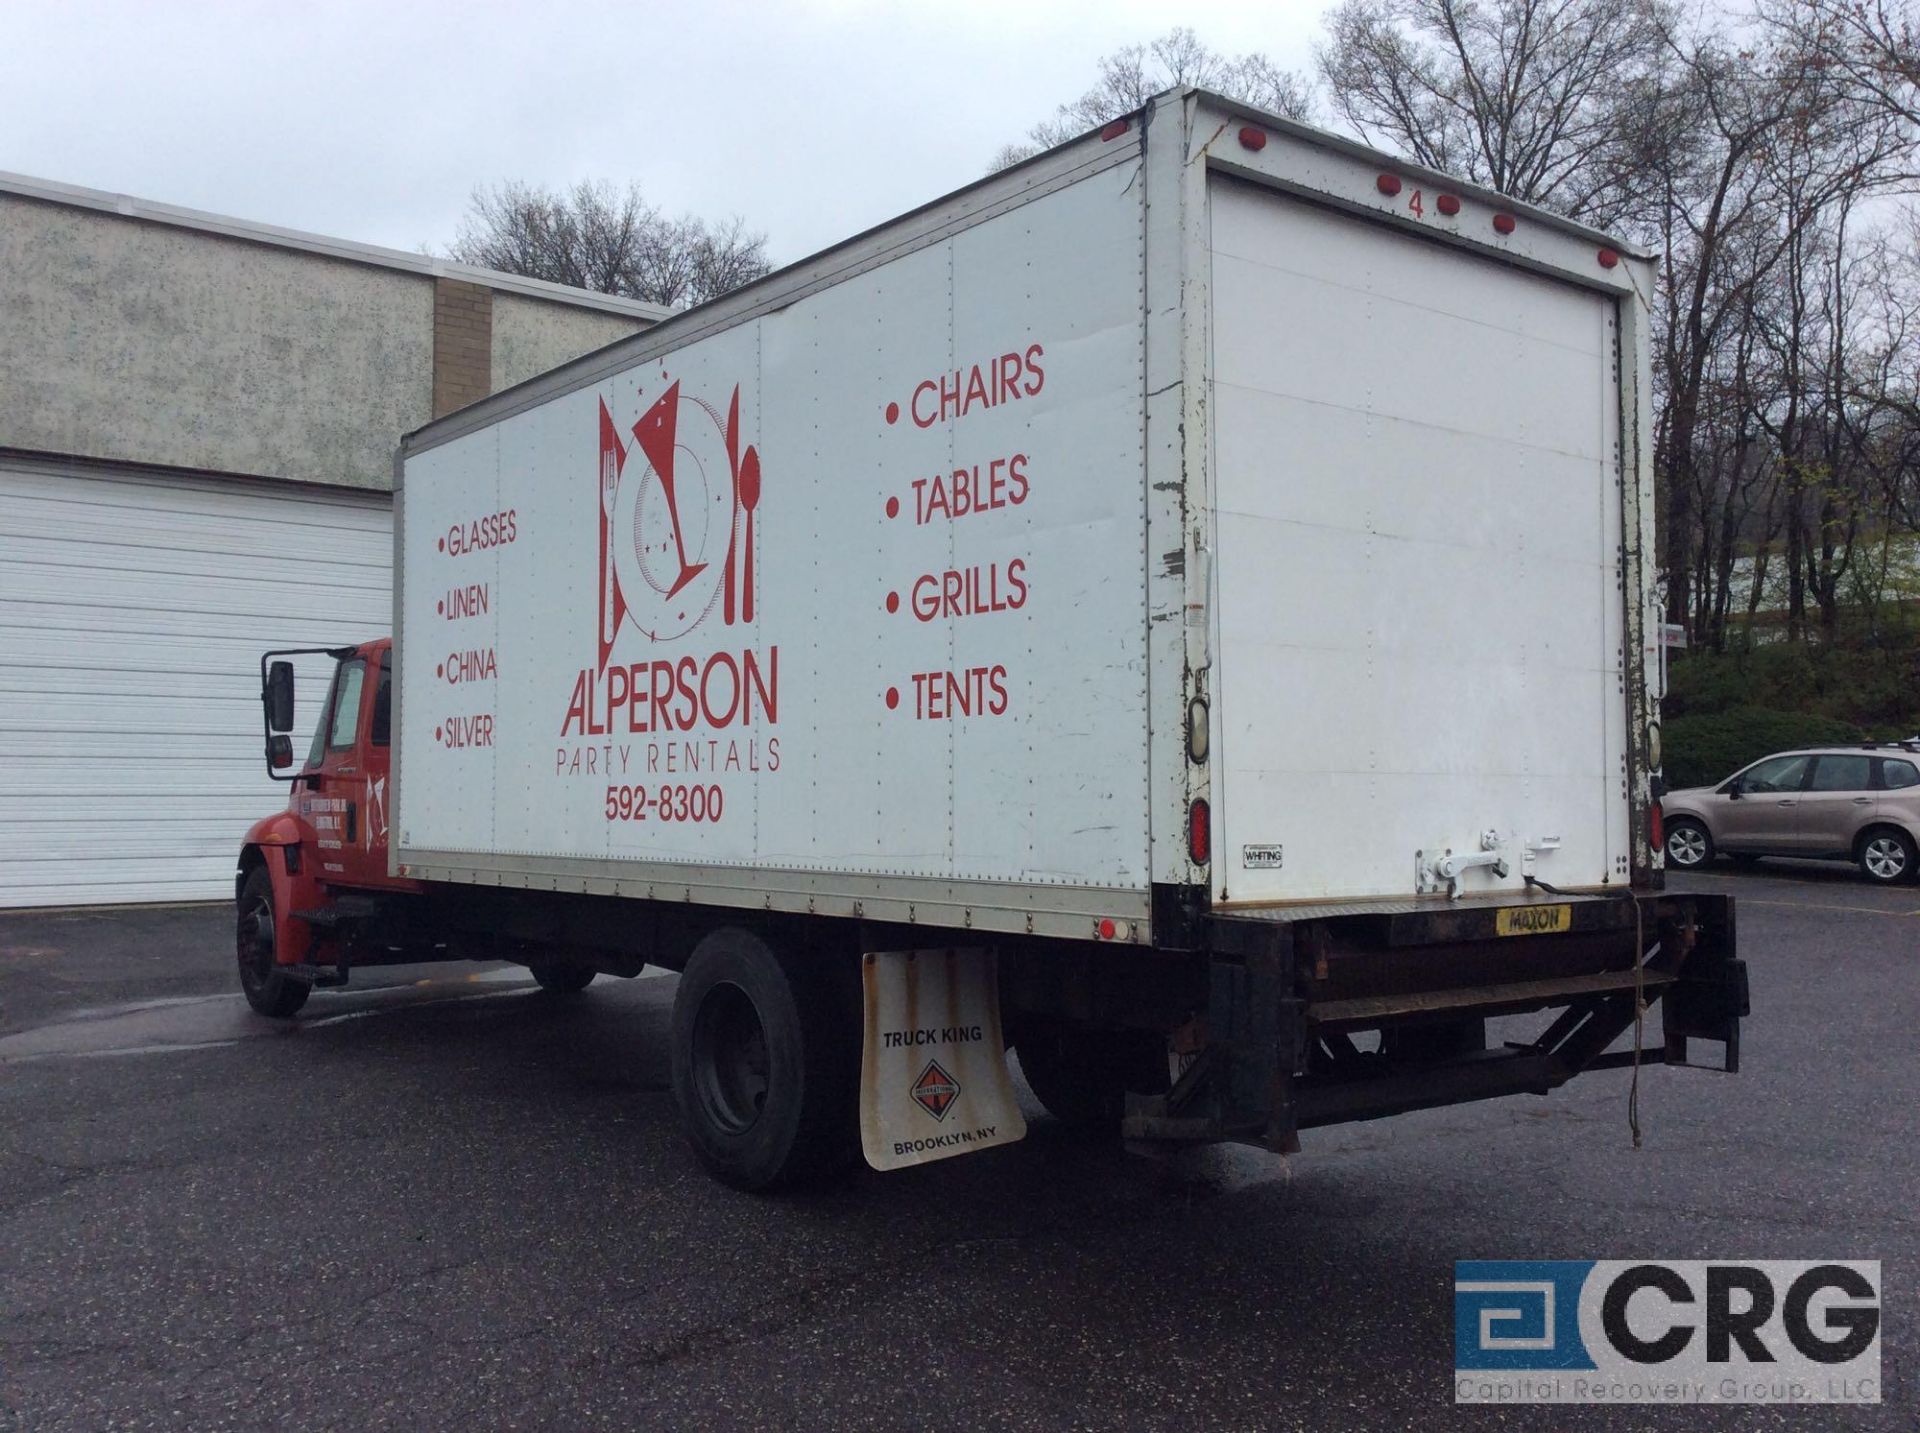 2006 International 20' box truck w/Extended Cab, DT466 ENGINE, A/T, Vinyl interior, Morgan 20' box - Image 4 of 8